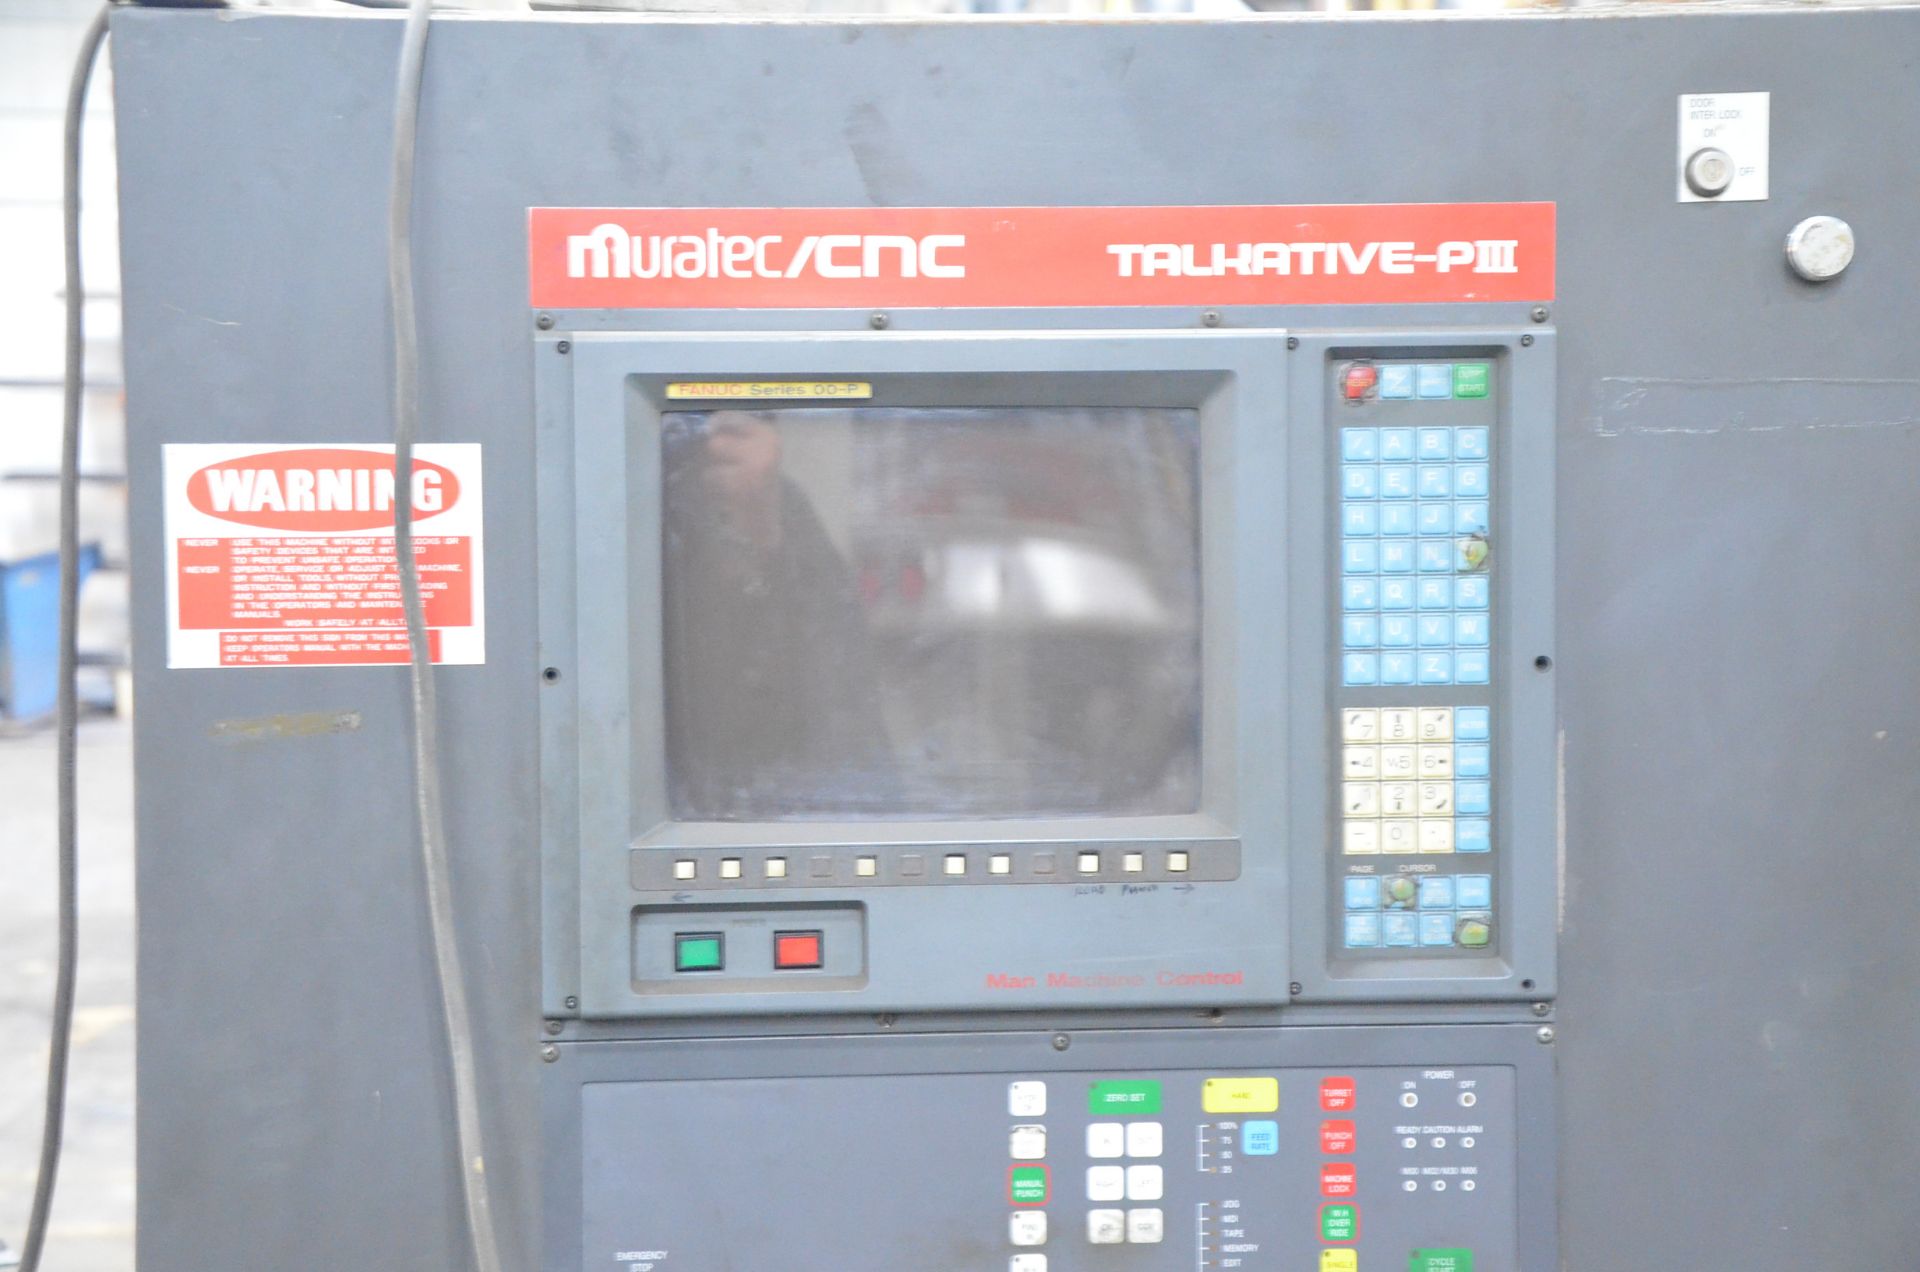 WIEDEMAN MURATECH VECTRUM 500 M-5 P4834 CNC TURRET PUNCH WITH FANUC OO-P CNC CONTROL, 52 STATION - Image 6 of 14